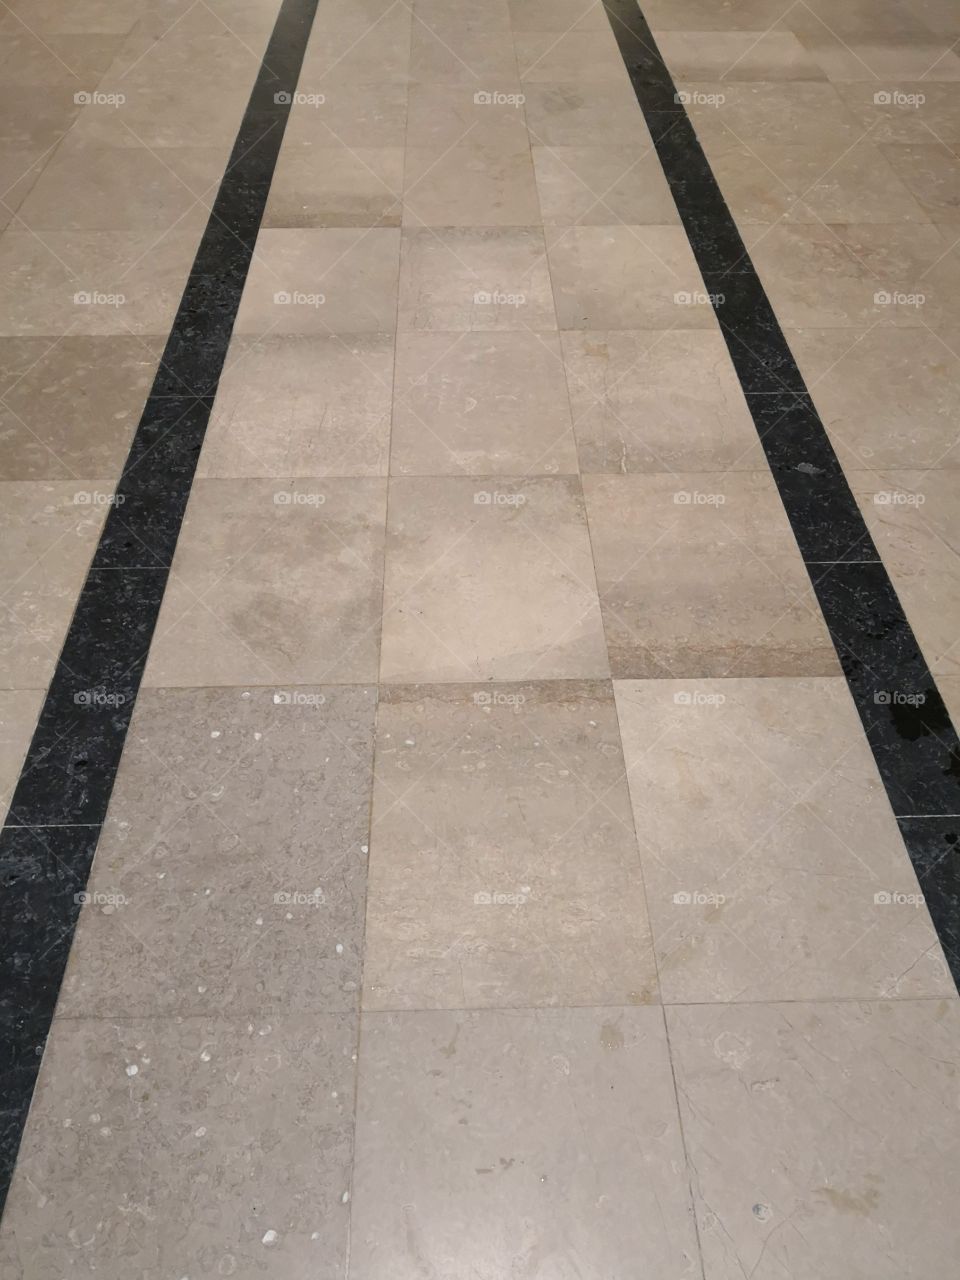 Floor, Church, Luxembourg, Luxembourg